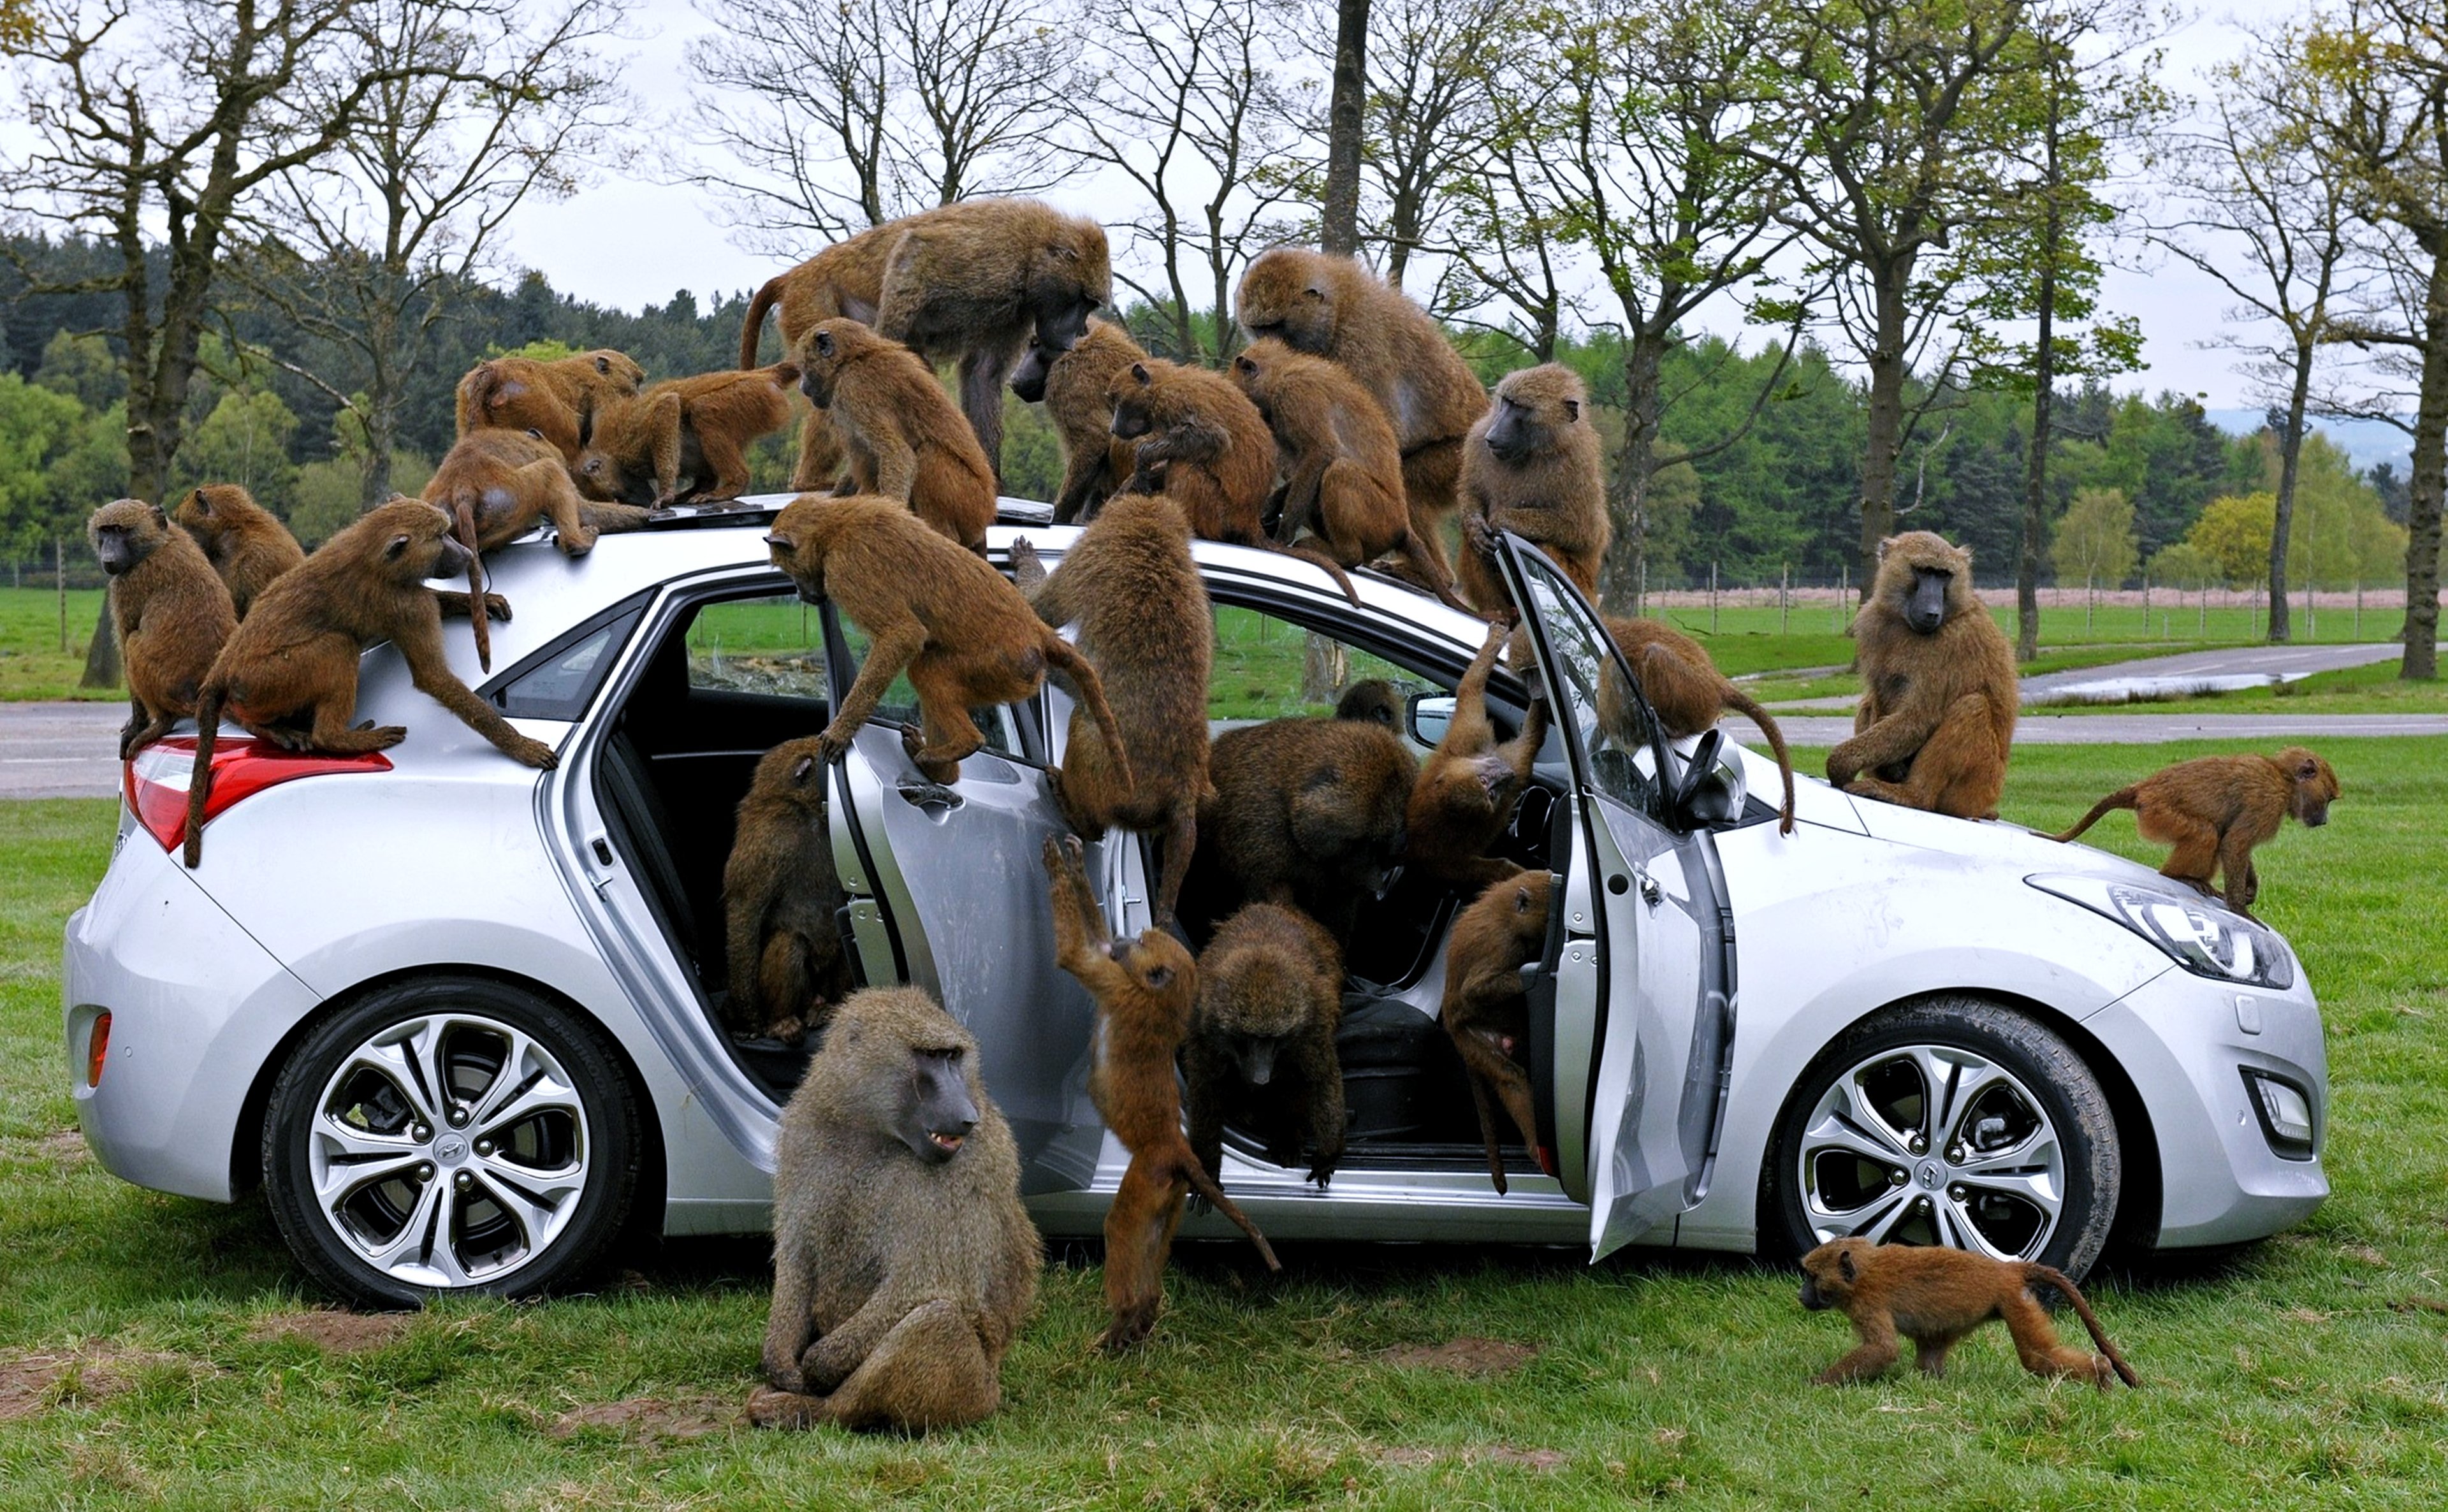 baboons, Monkey, Cars, Animals, Landscape, Trees, Forest Wallpaper